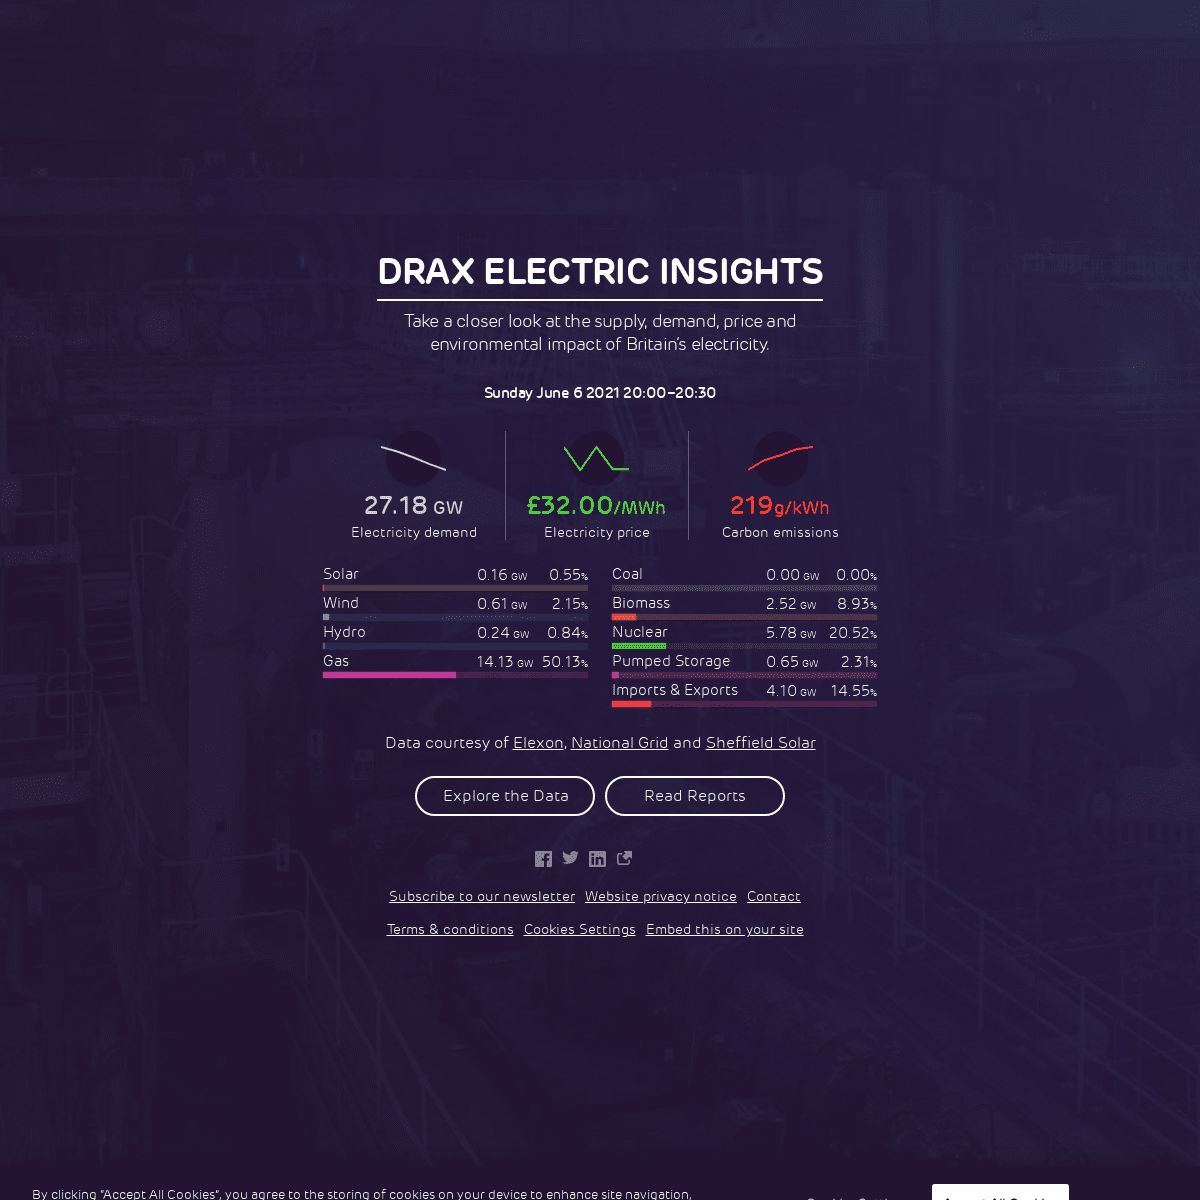 A complete backup of https://electricinsights.co.uk